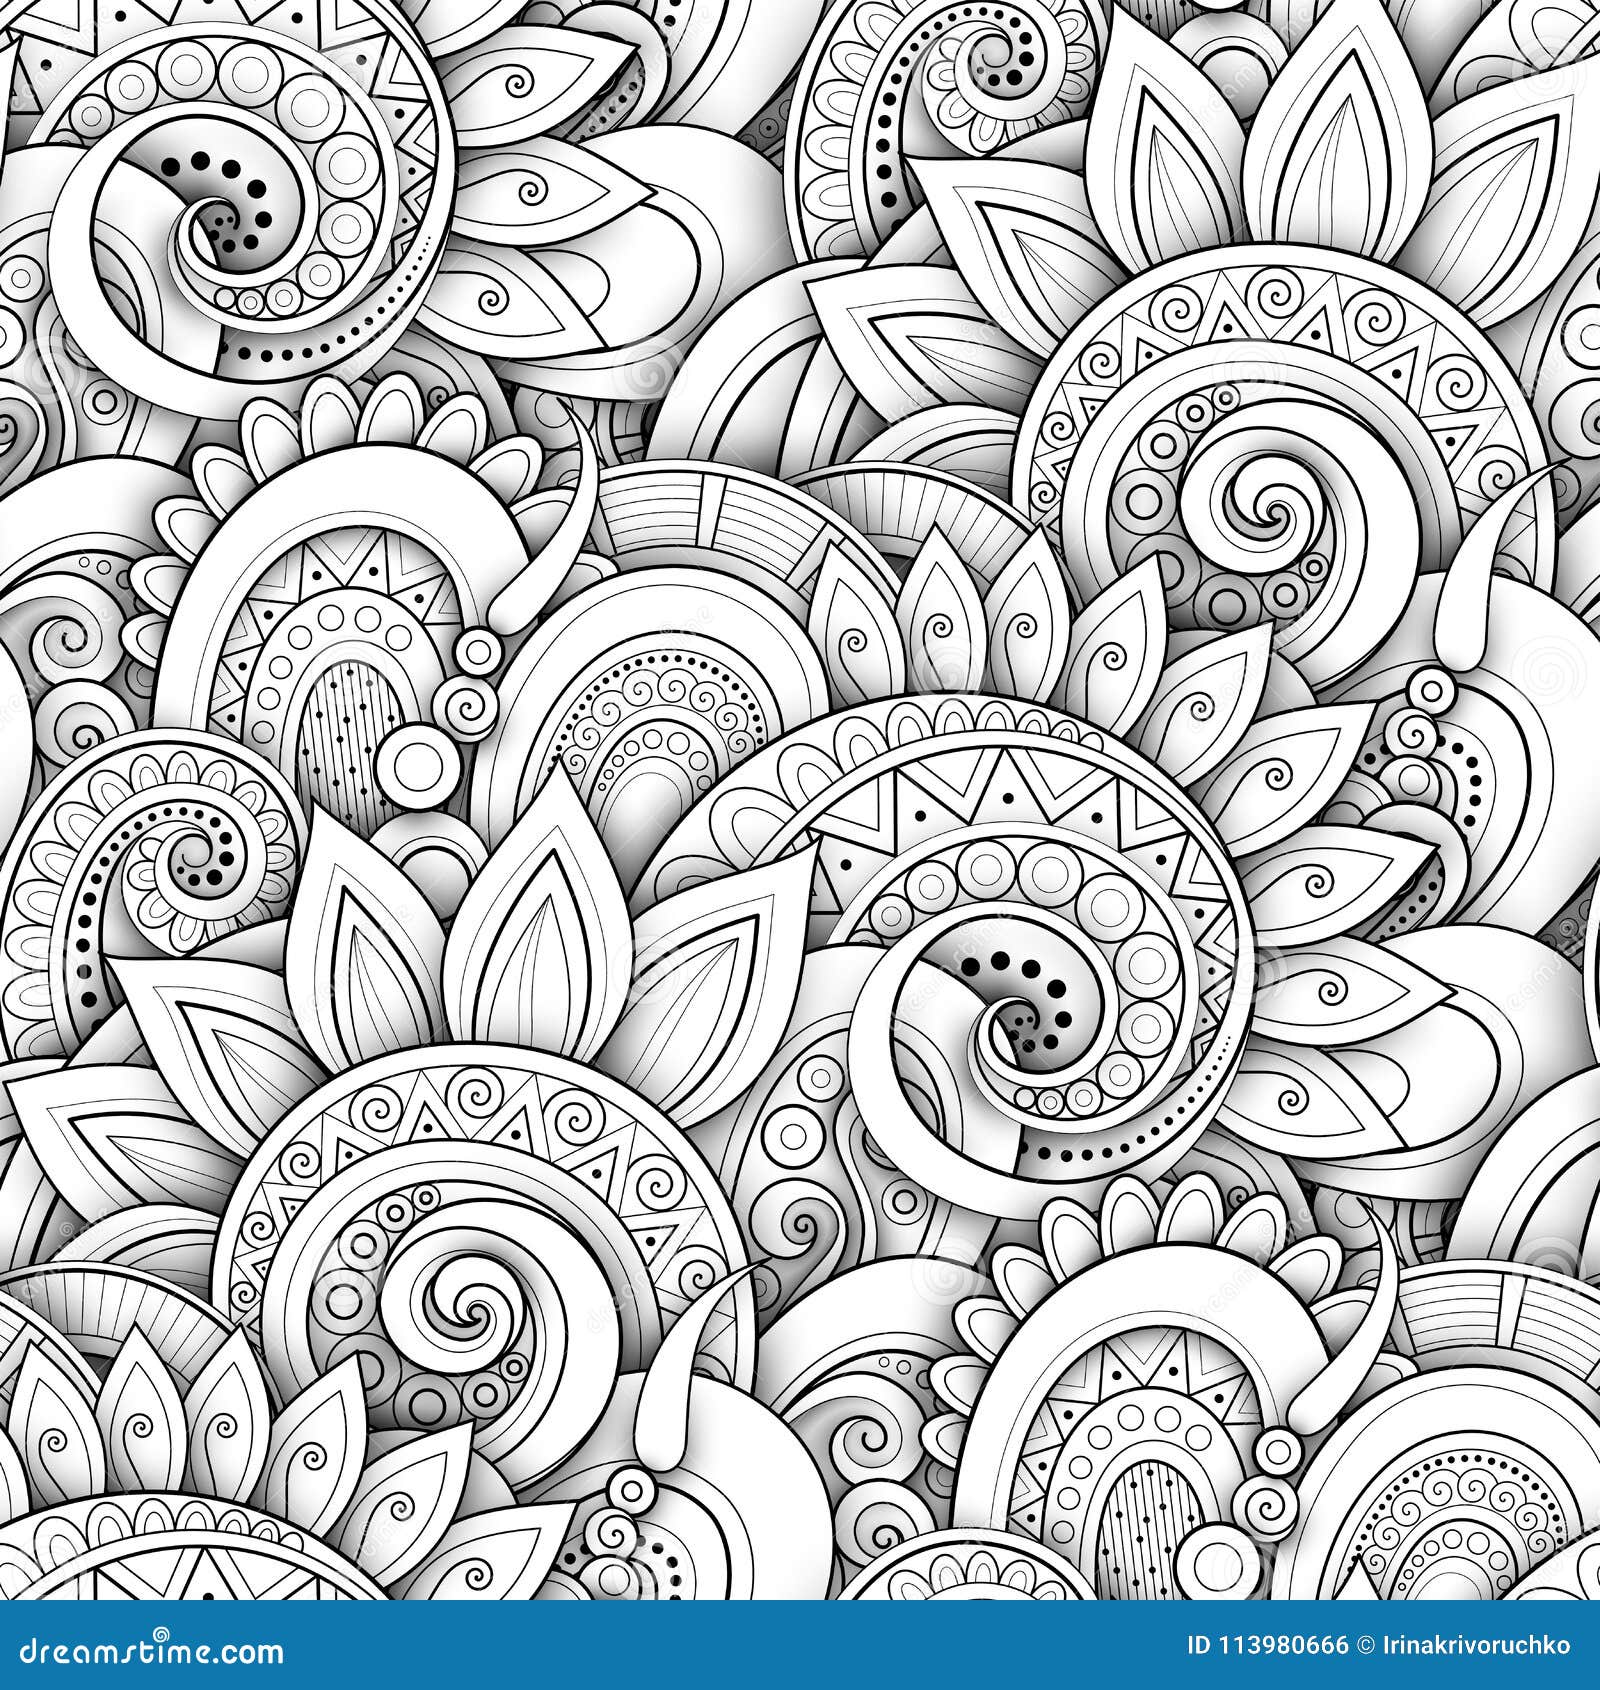 monochrome seamless pattern with floral motifs